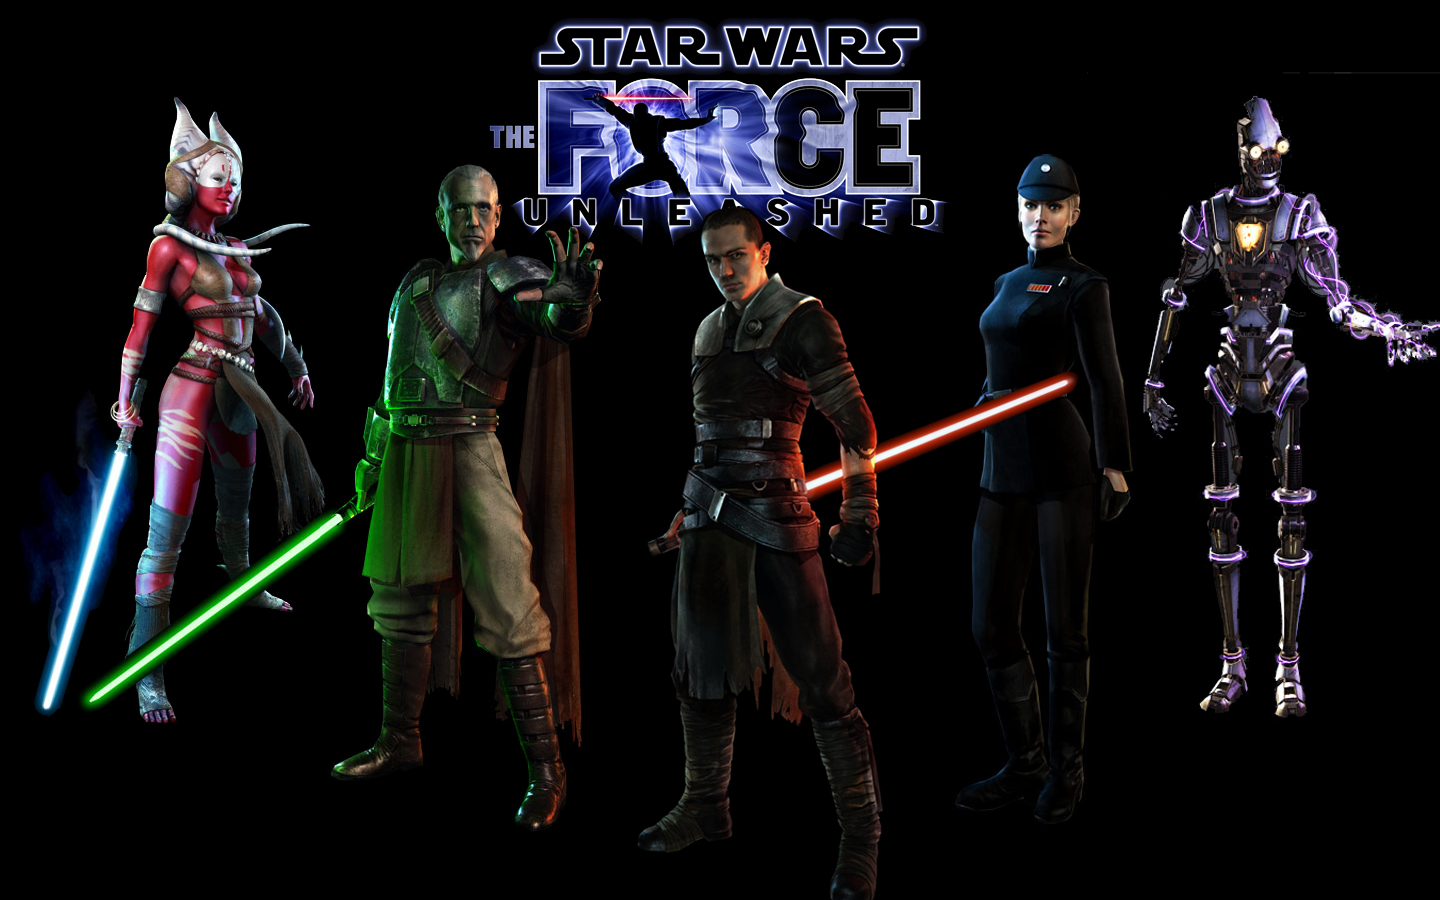 The Force Unleashed wallpaper by JediKnight14